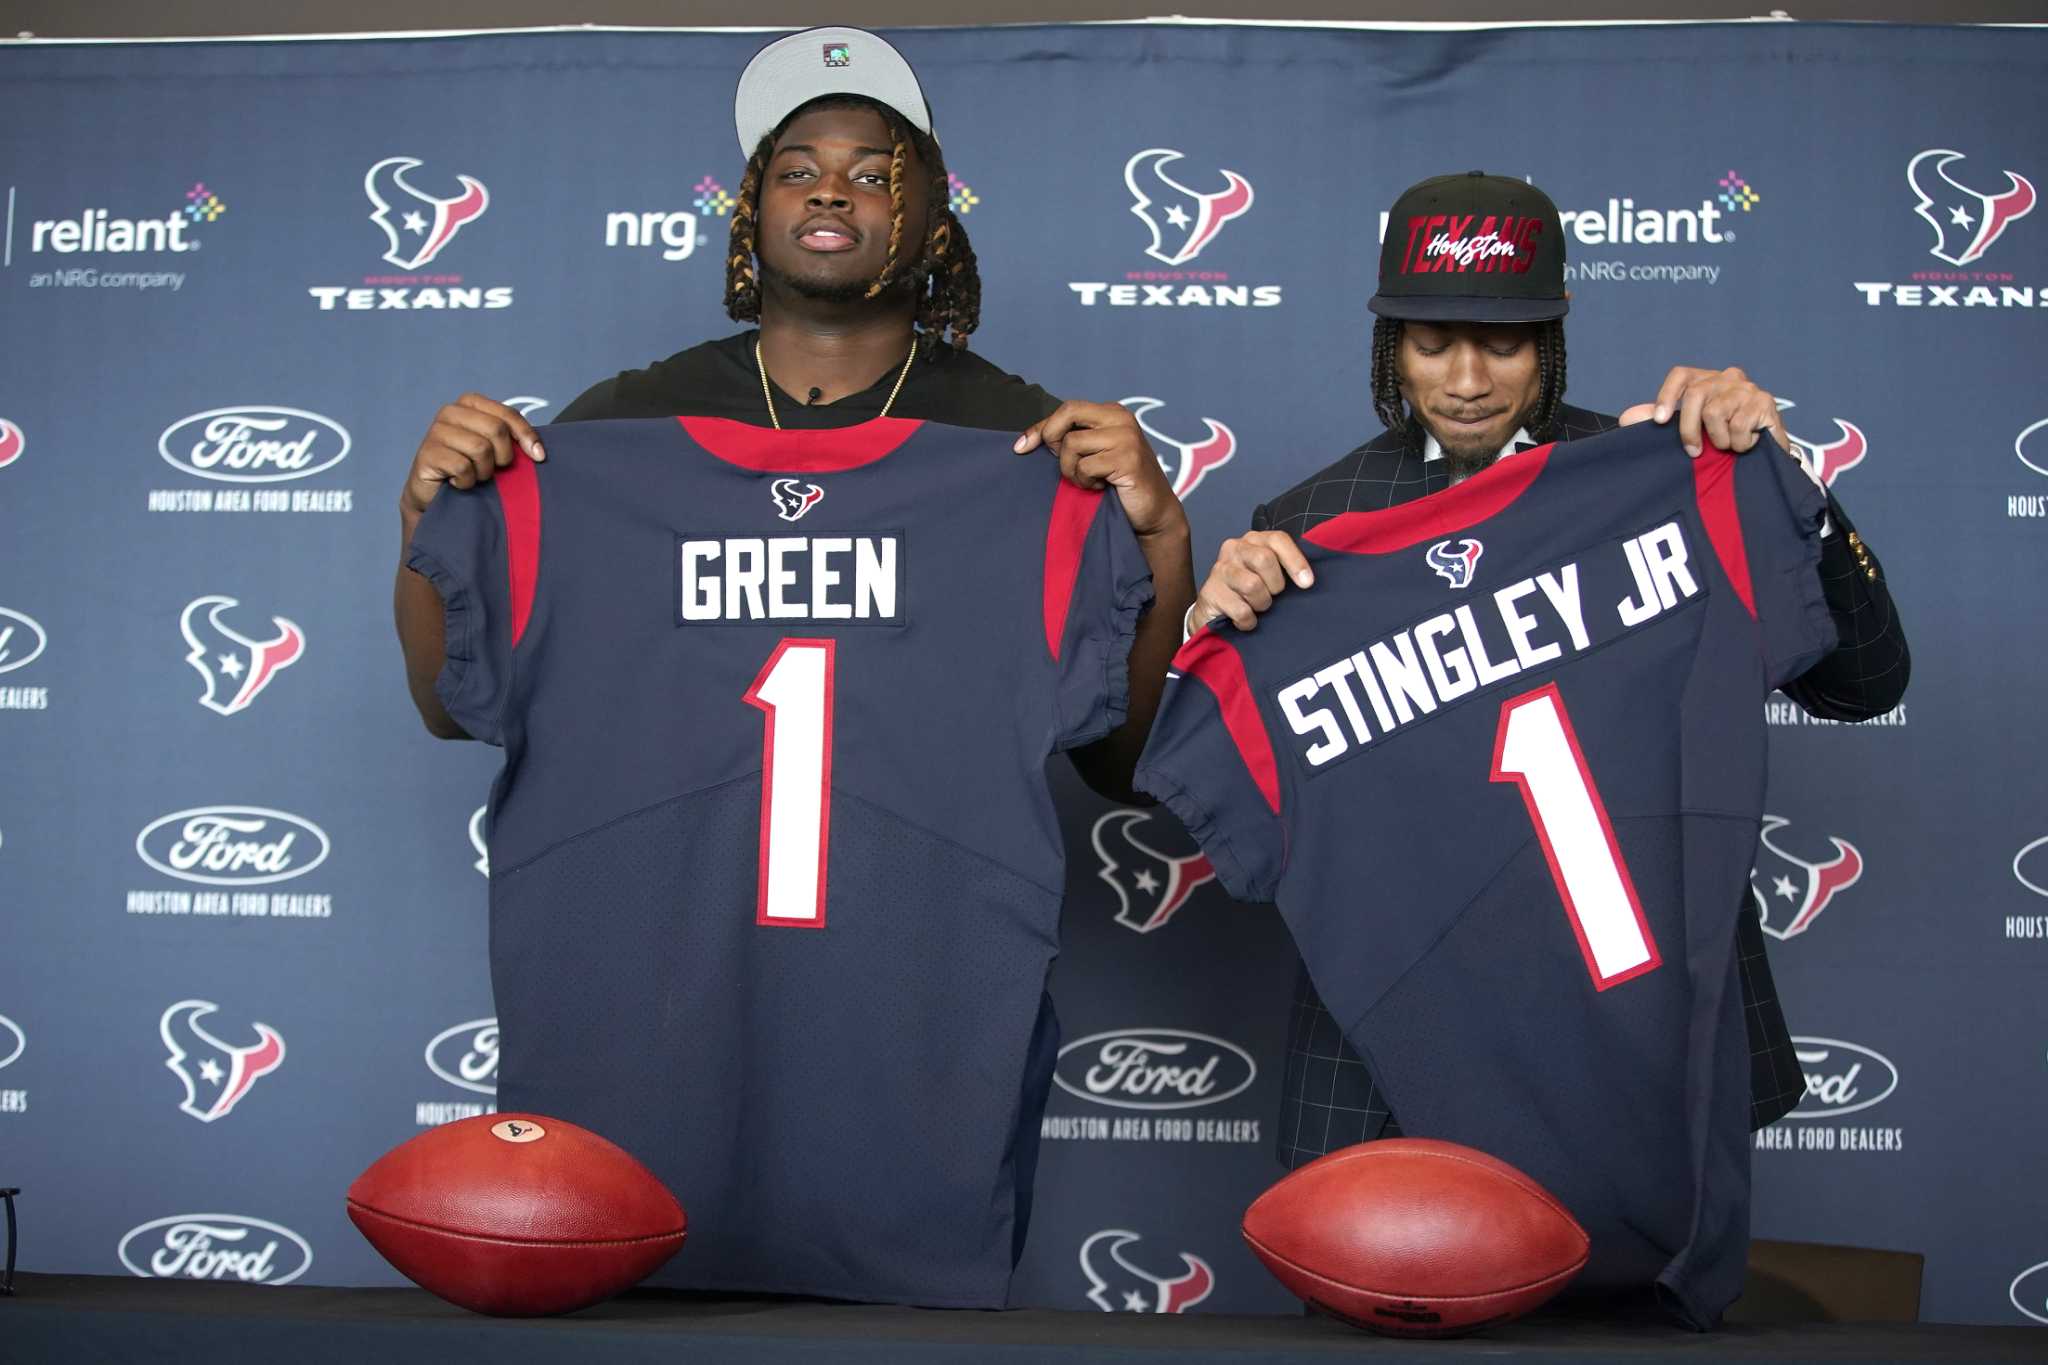 How the experts graded the Houston Texans' draft